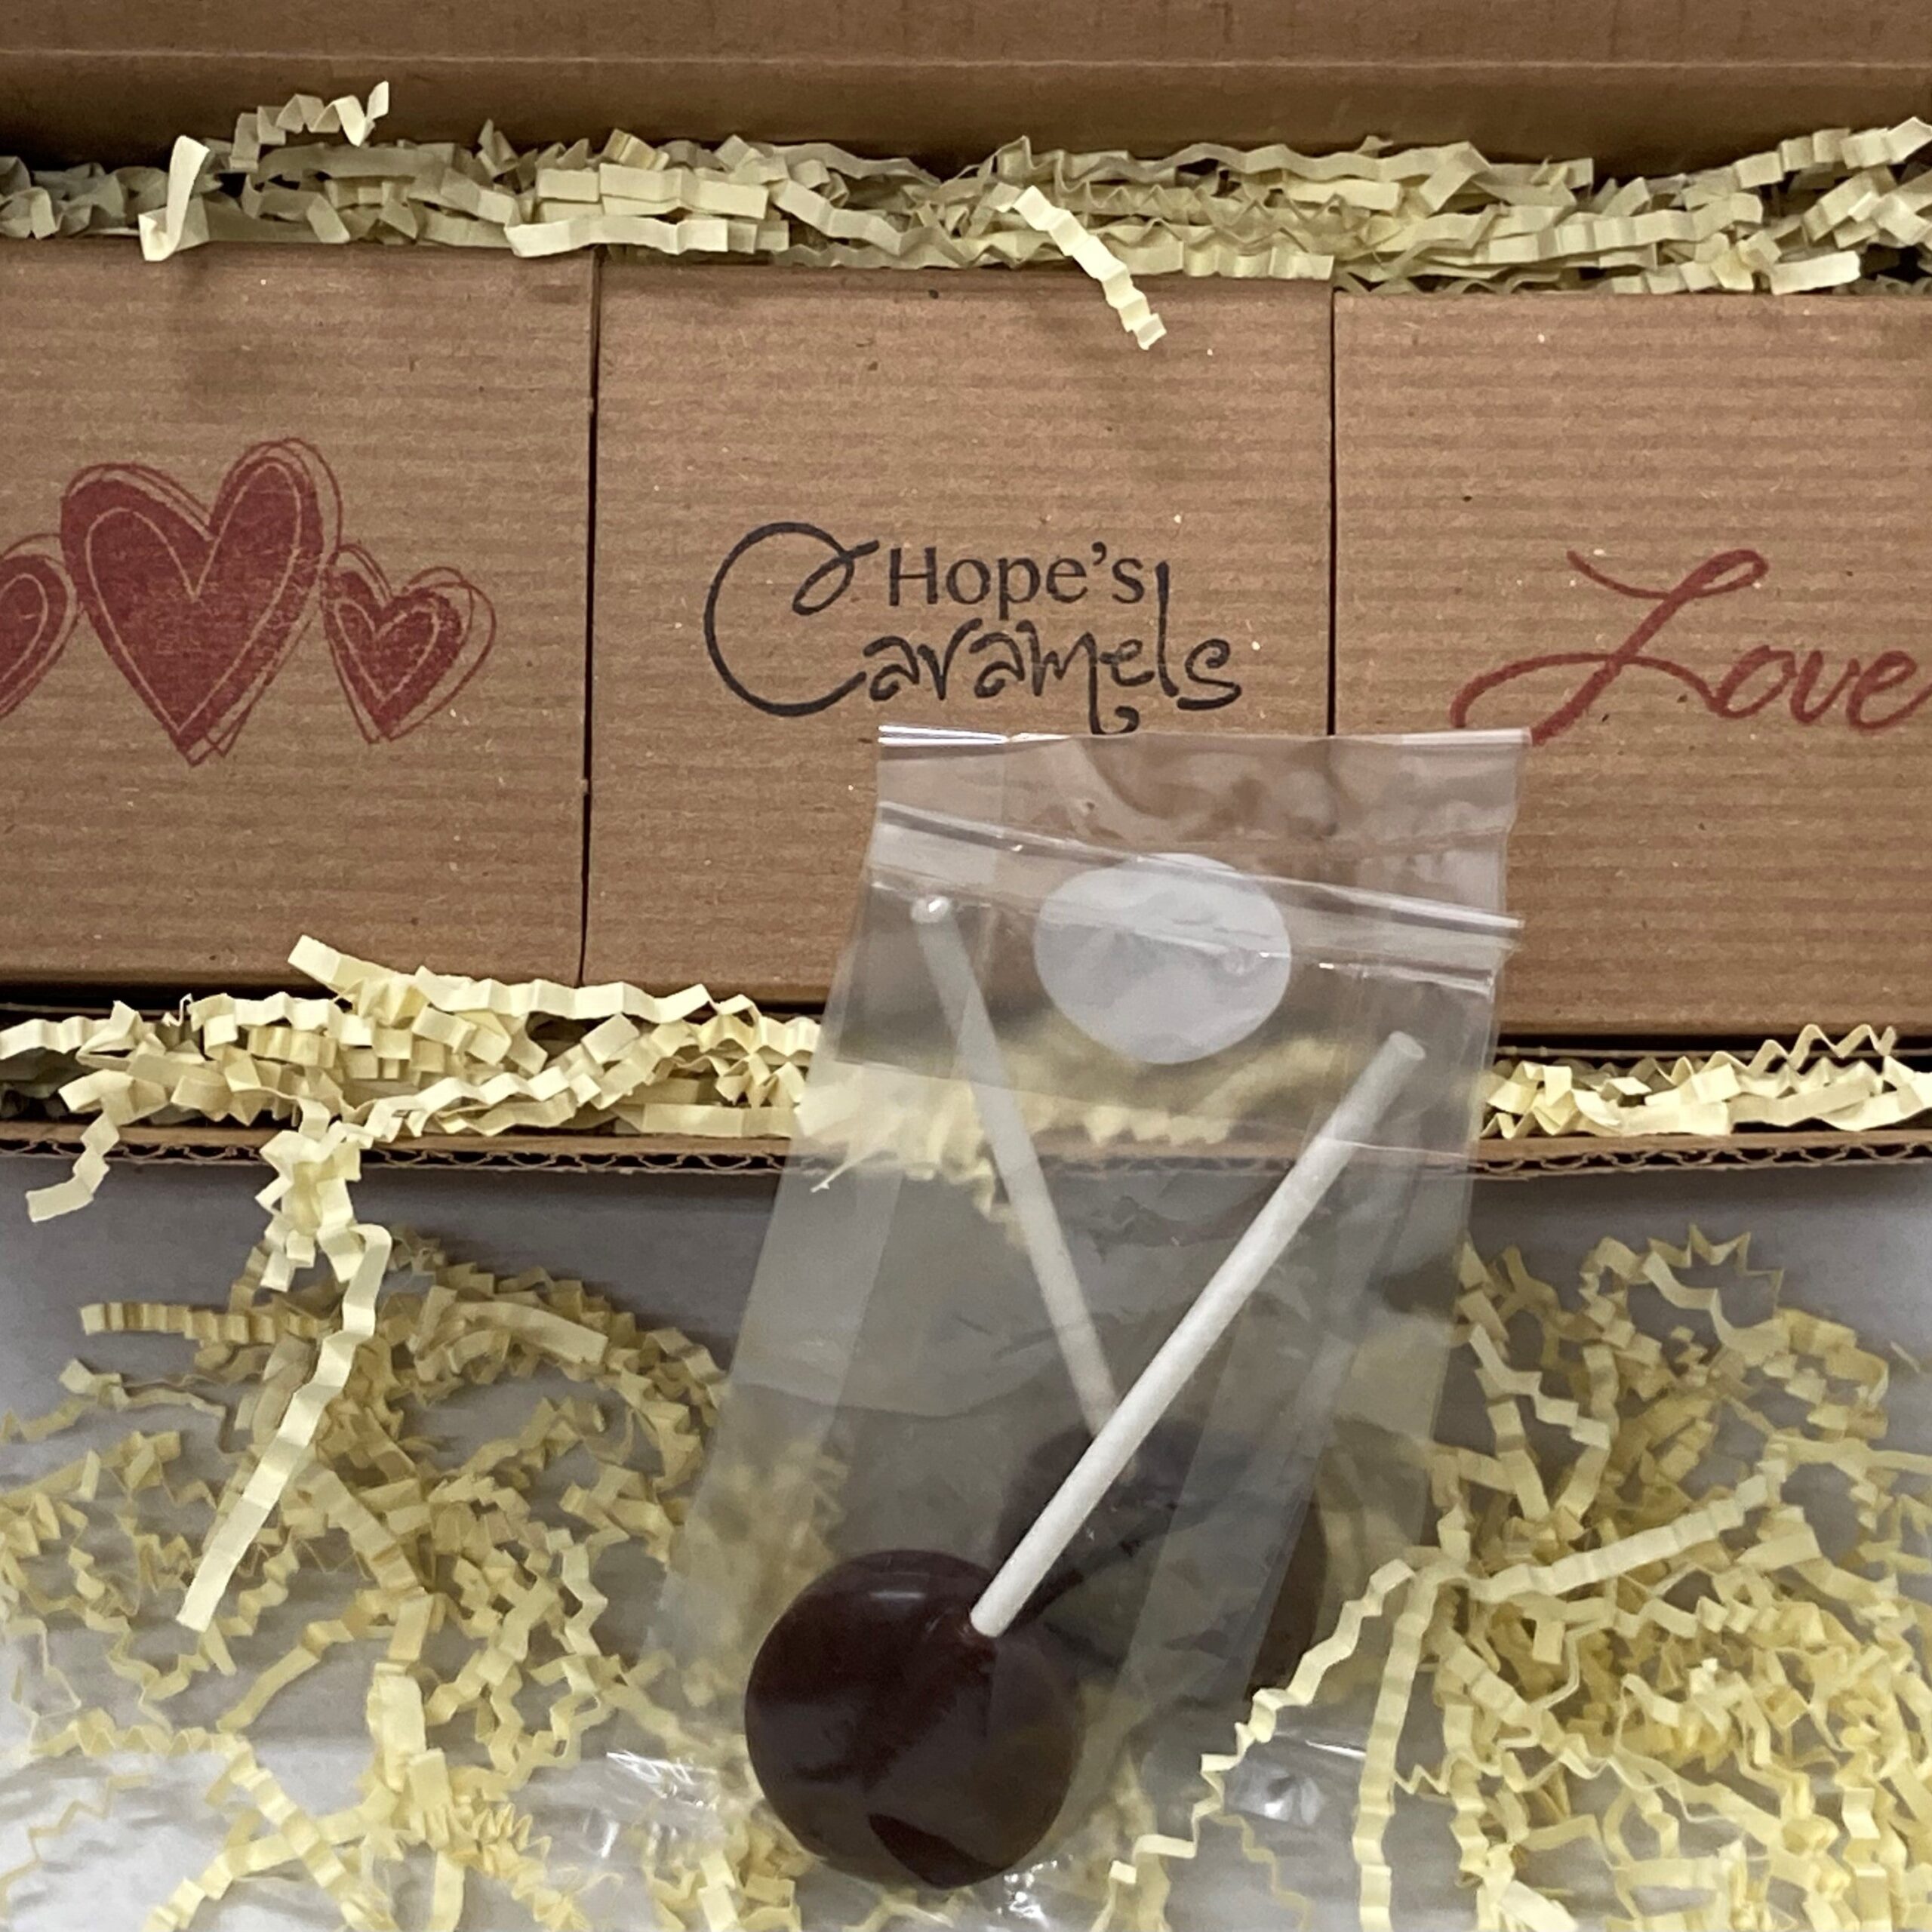 Hope’s Handcrafted Caramels “I Love You” Gift Box